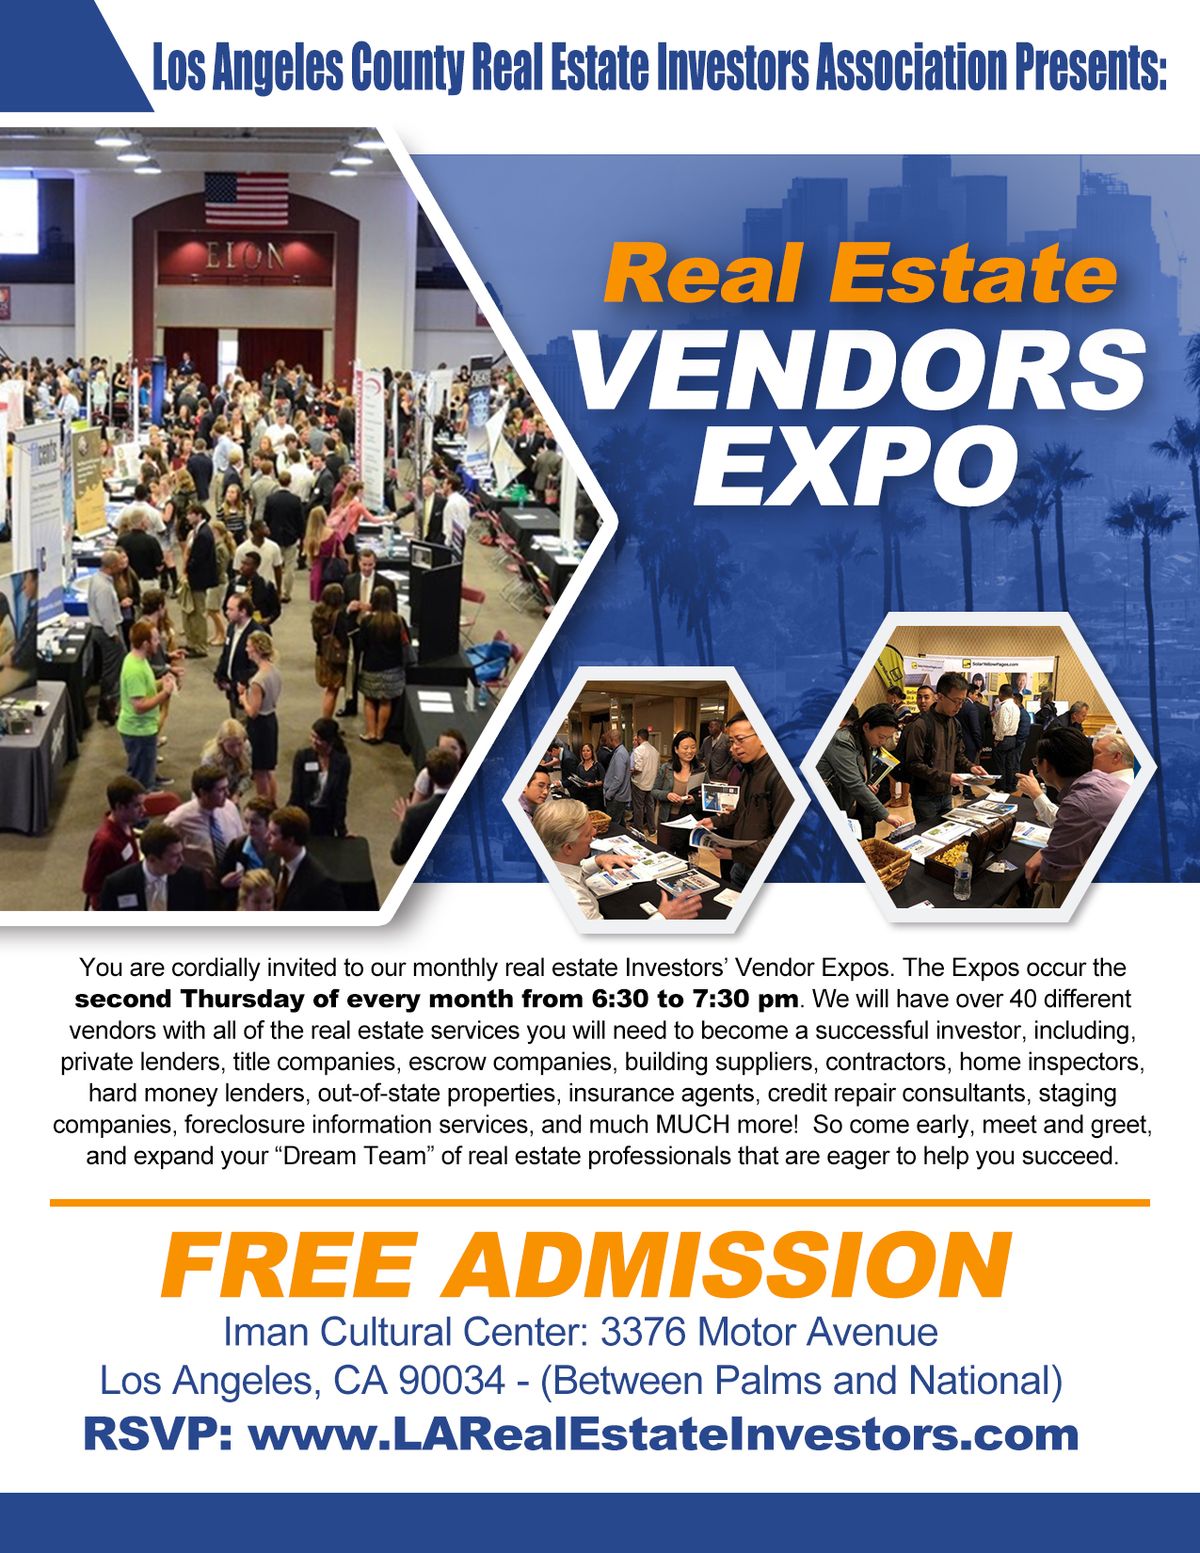 Real Estate vendors Expo Returns May 9th